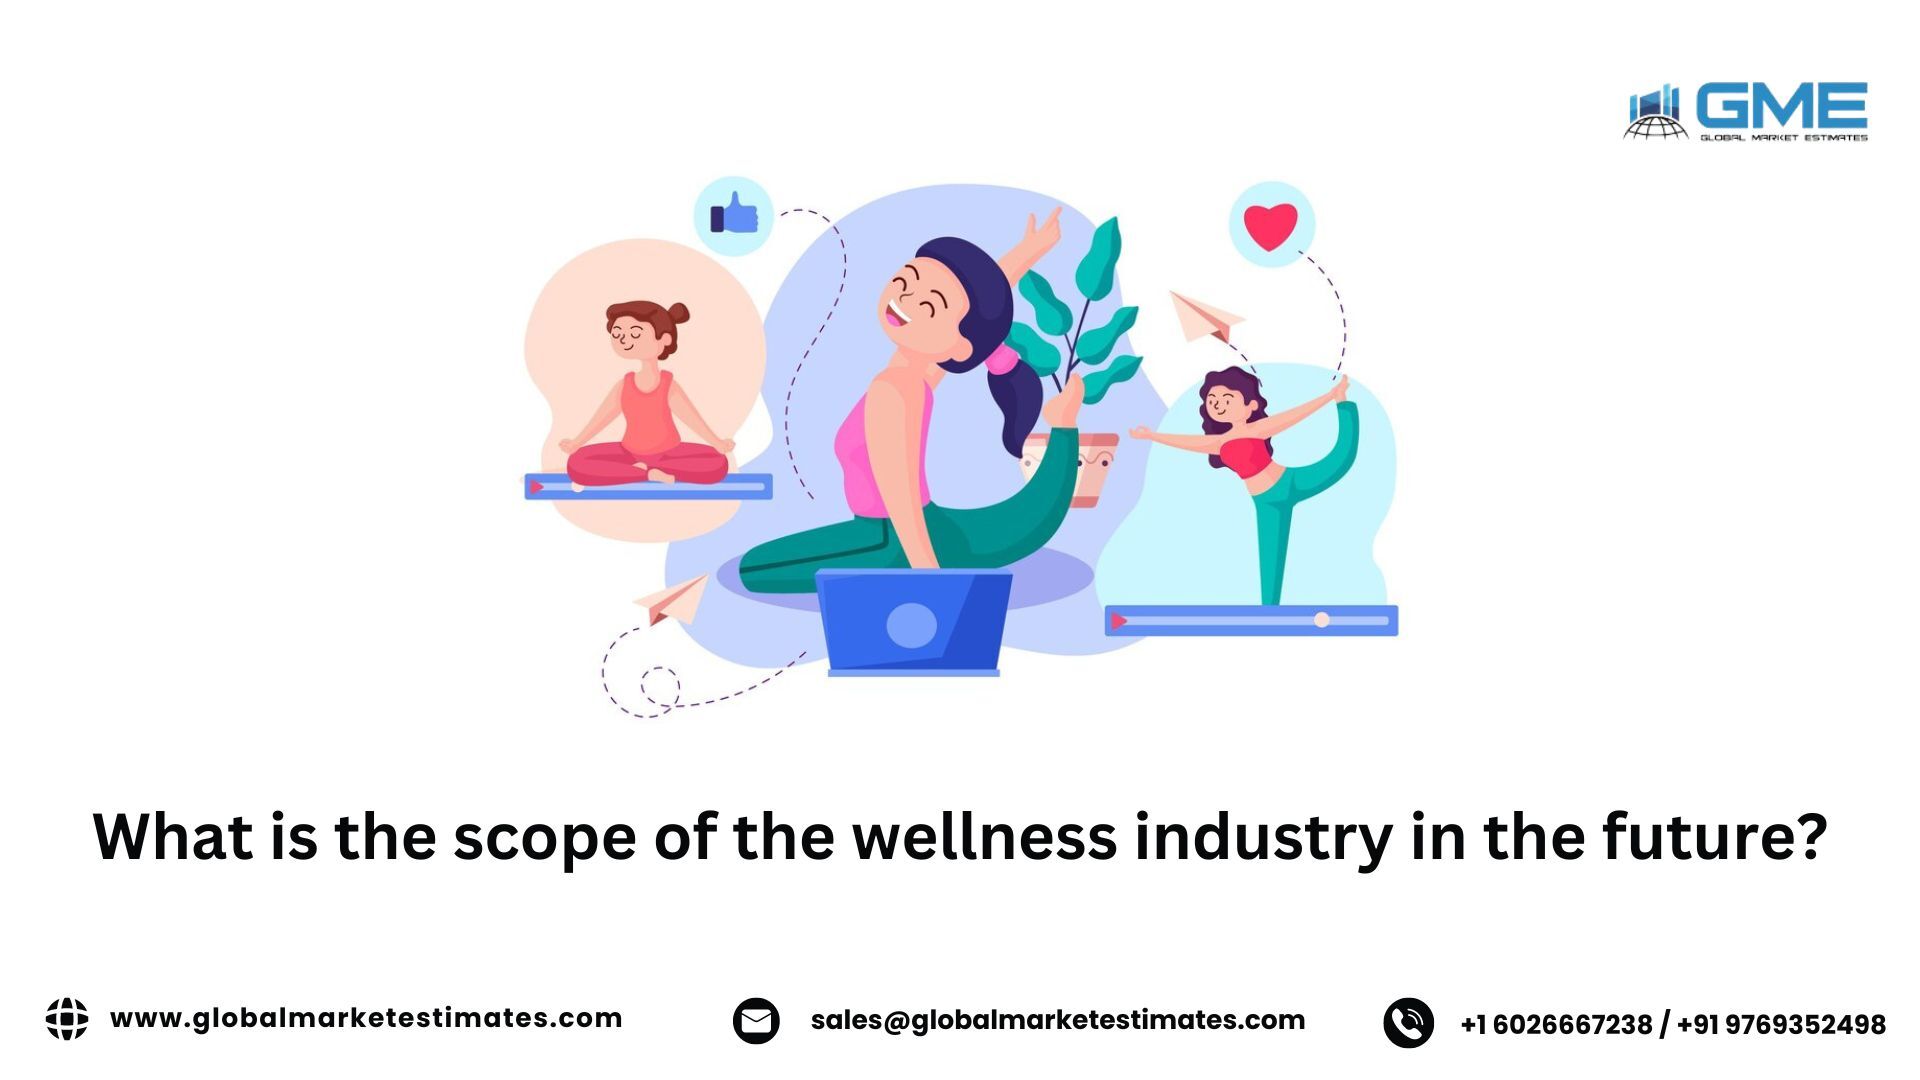 What is the scope of the wellness industry in the future?